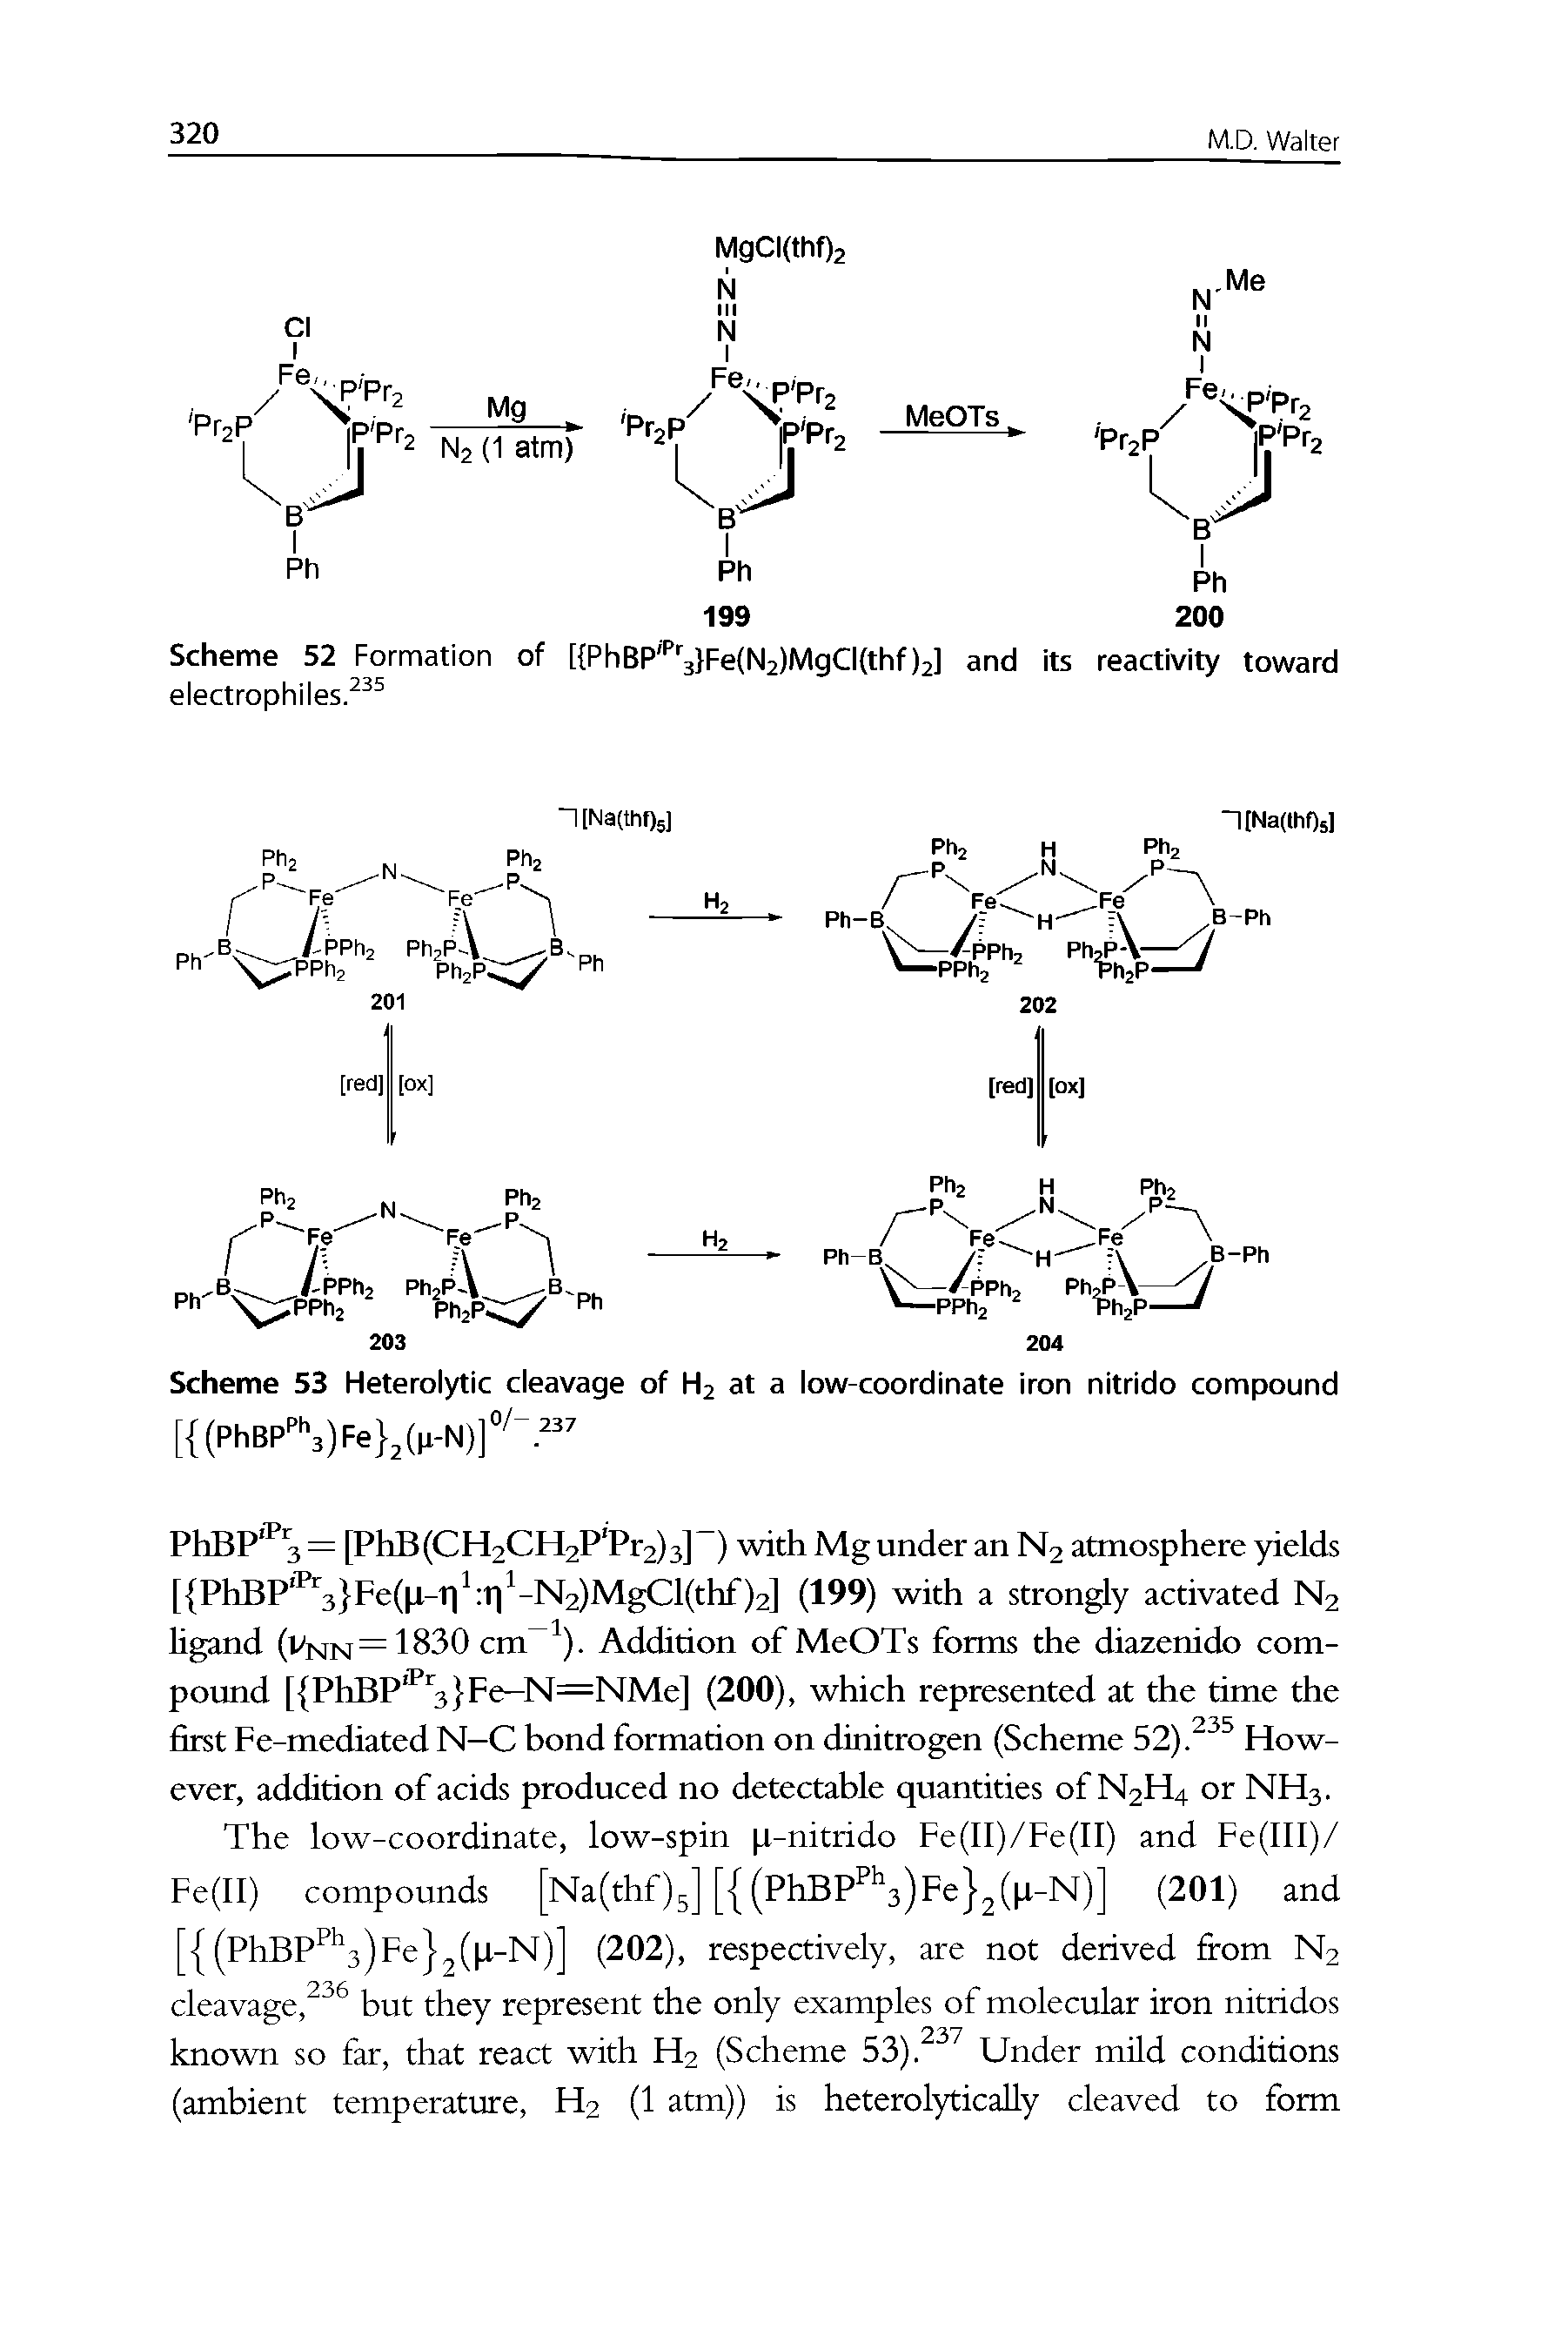 Scheme 53 Heterolytic cleavage of Ha at a low-coordinate iron nitrido compound...